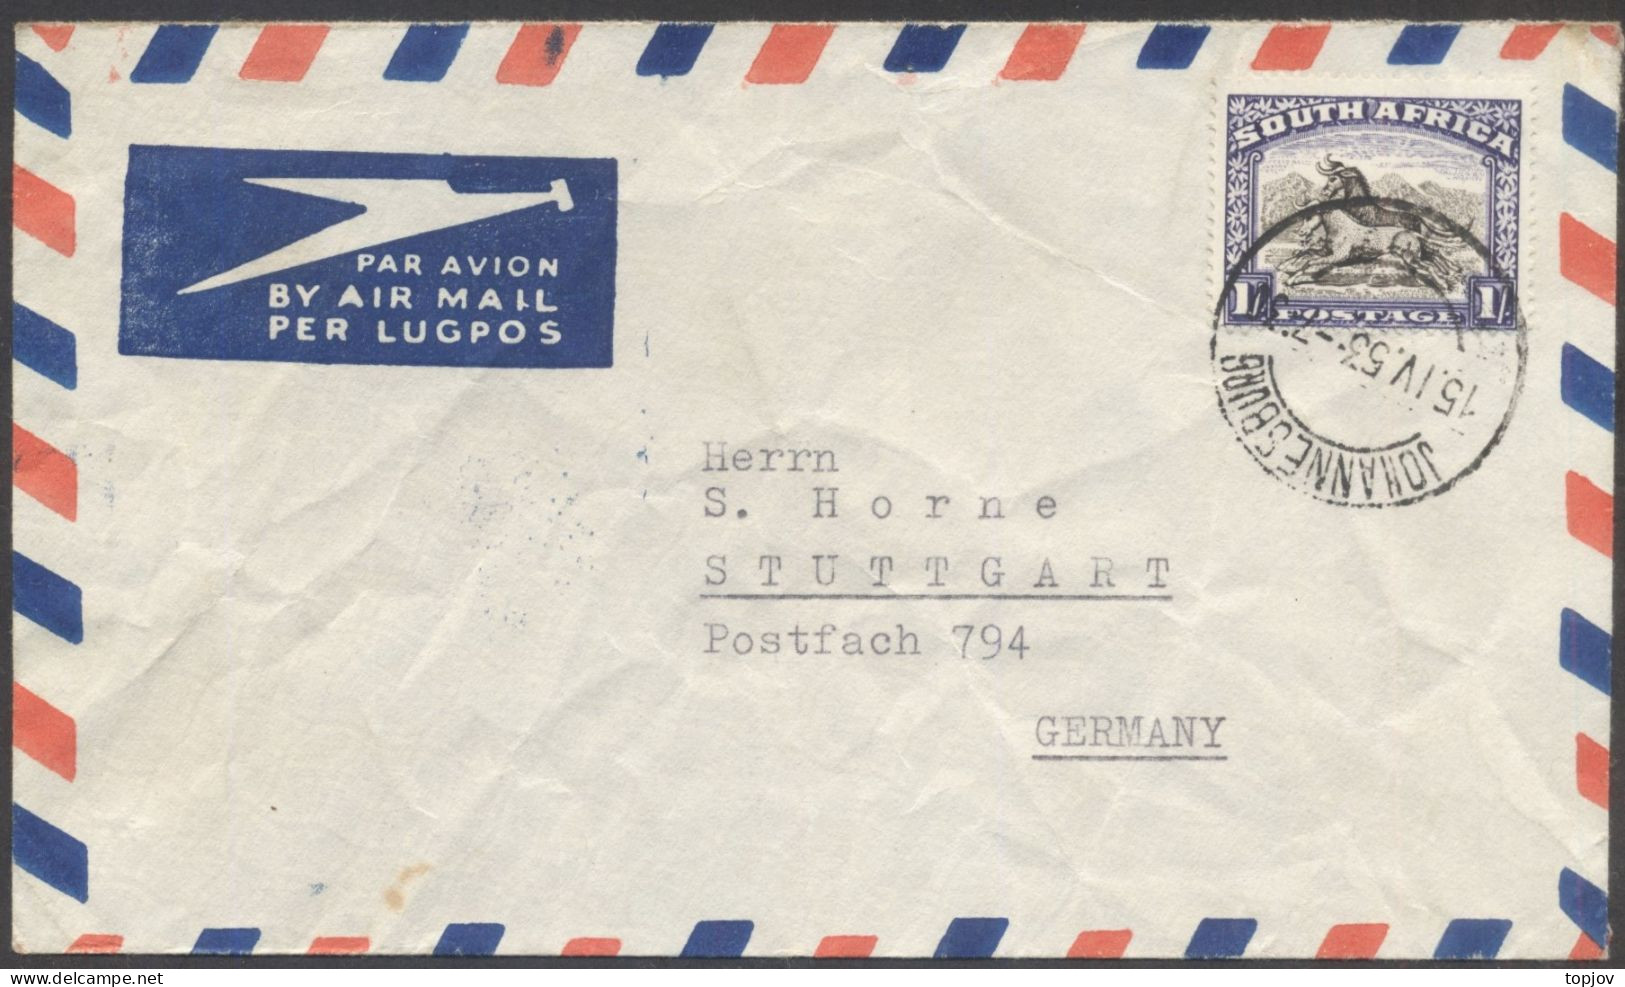 SOUTH AFRICA  RSA - JOHANNESBURG To GERMANY AIRMAIL - ANIMALS - 1953 - Airmail